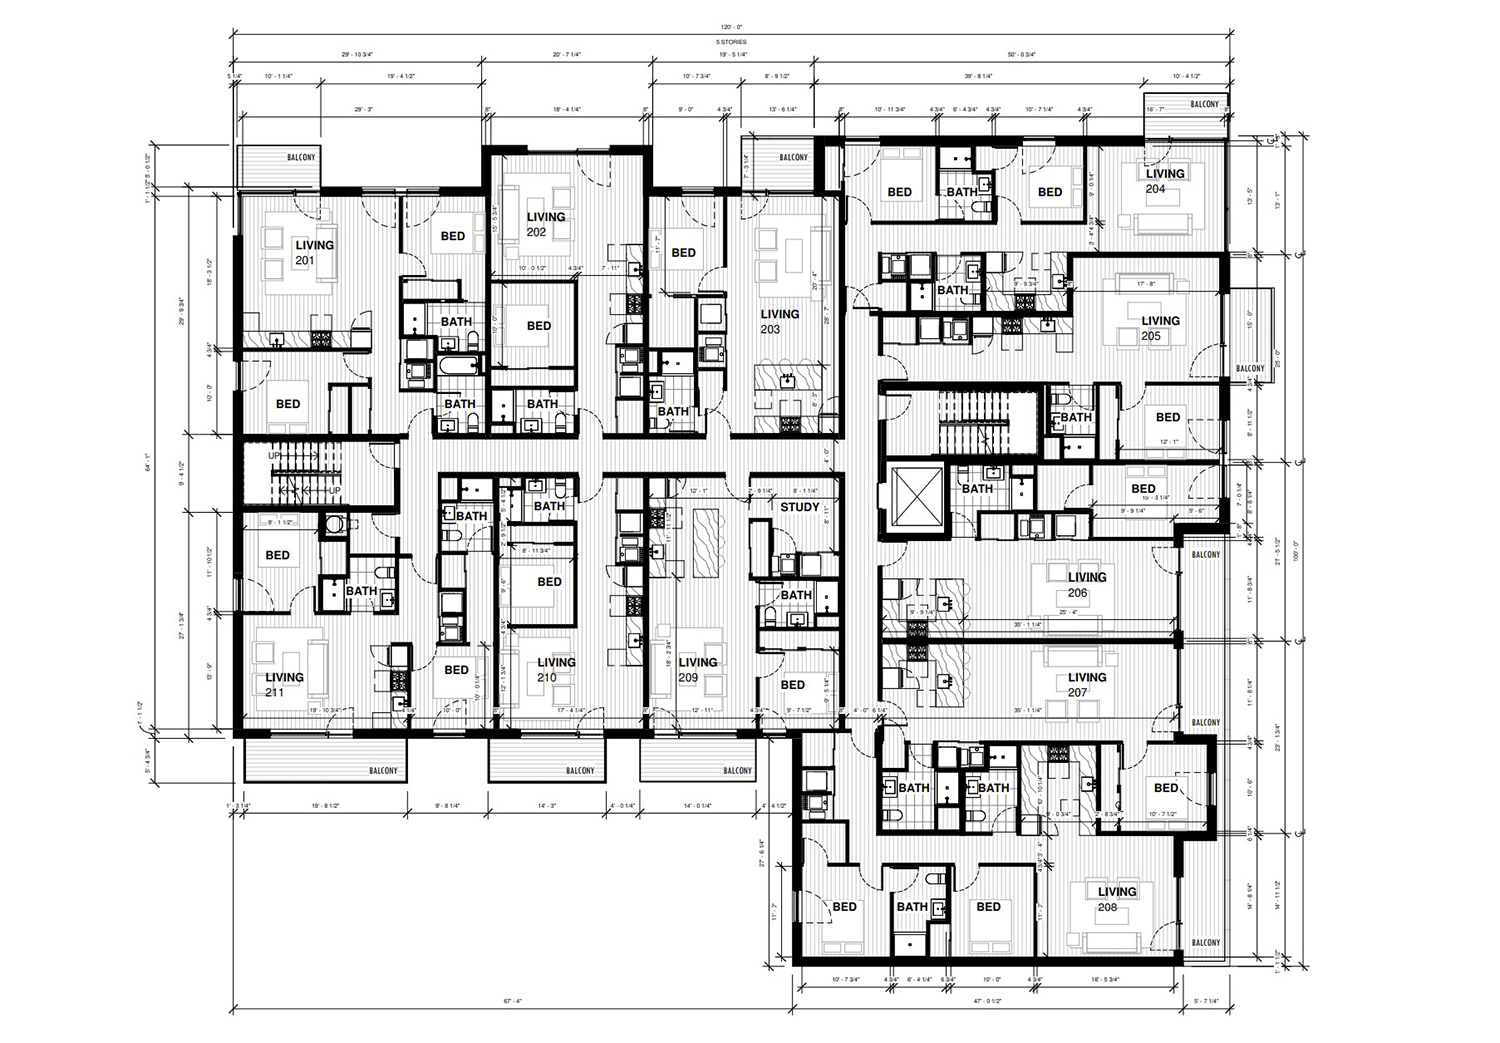 Residential Floor Plan for 5354 N Sheridan Road. Drawing by 2RZ Architecture